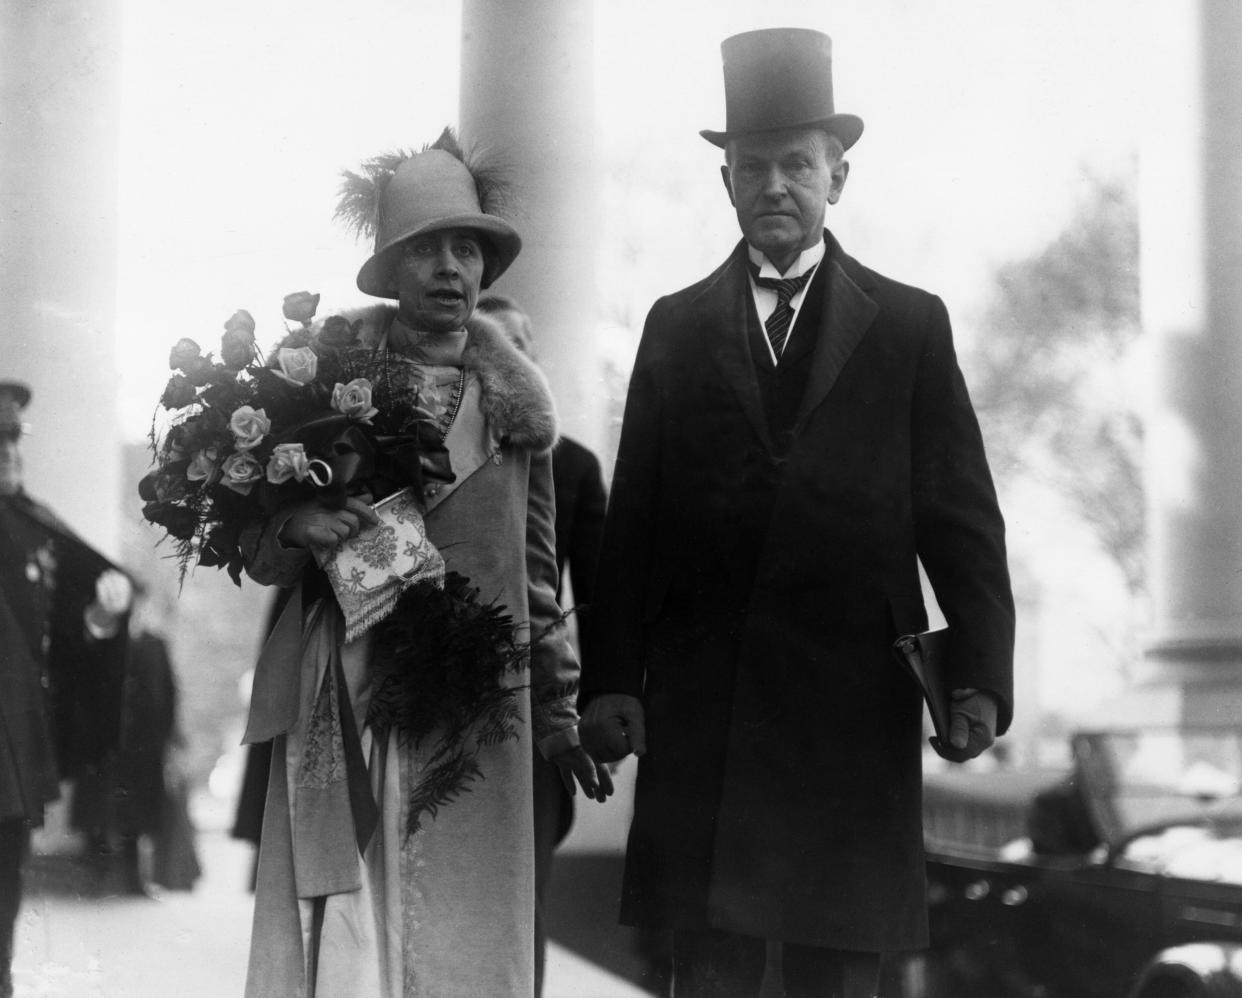 The Coolidges leave the White House for the 1925 inauguration, at which he was sworn in for a full term after succeeding to the presidency when Harding died in 1923.